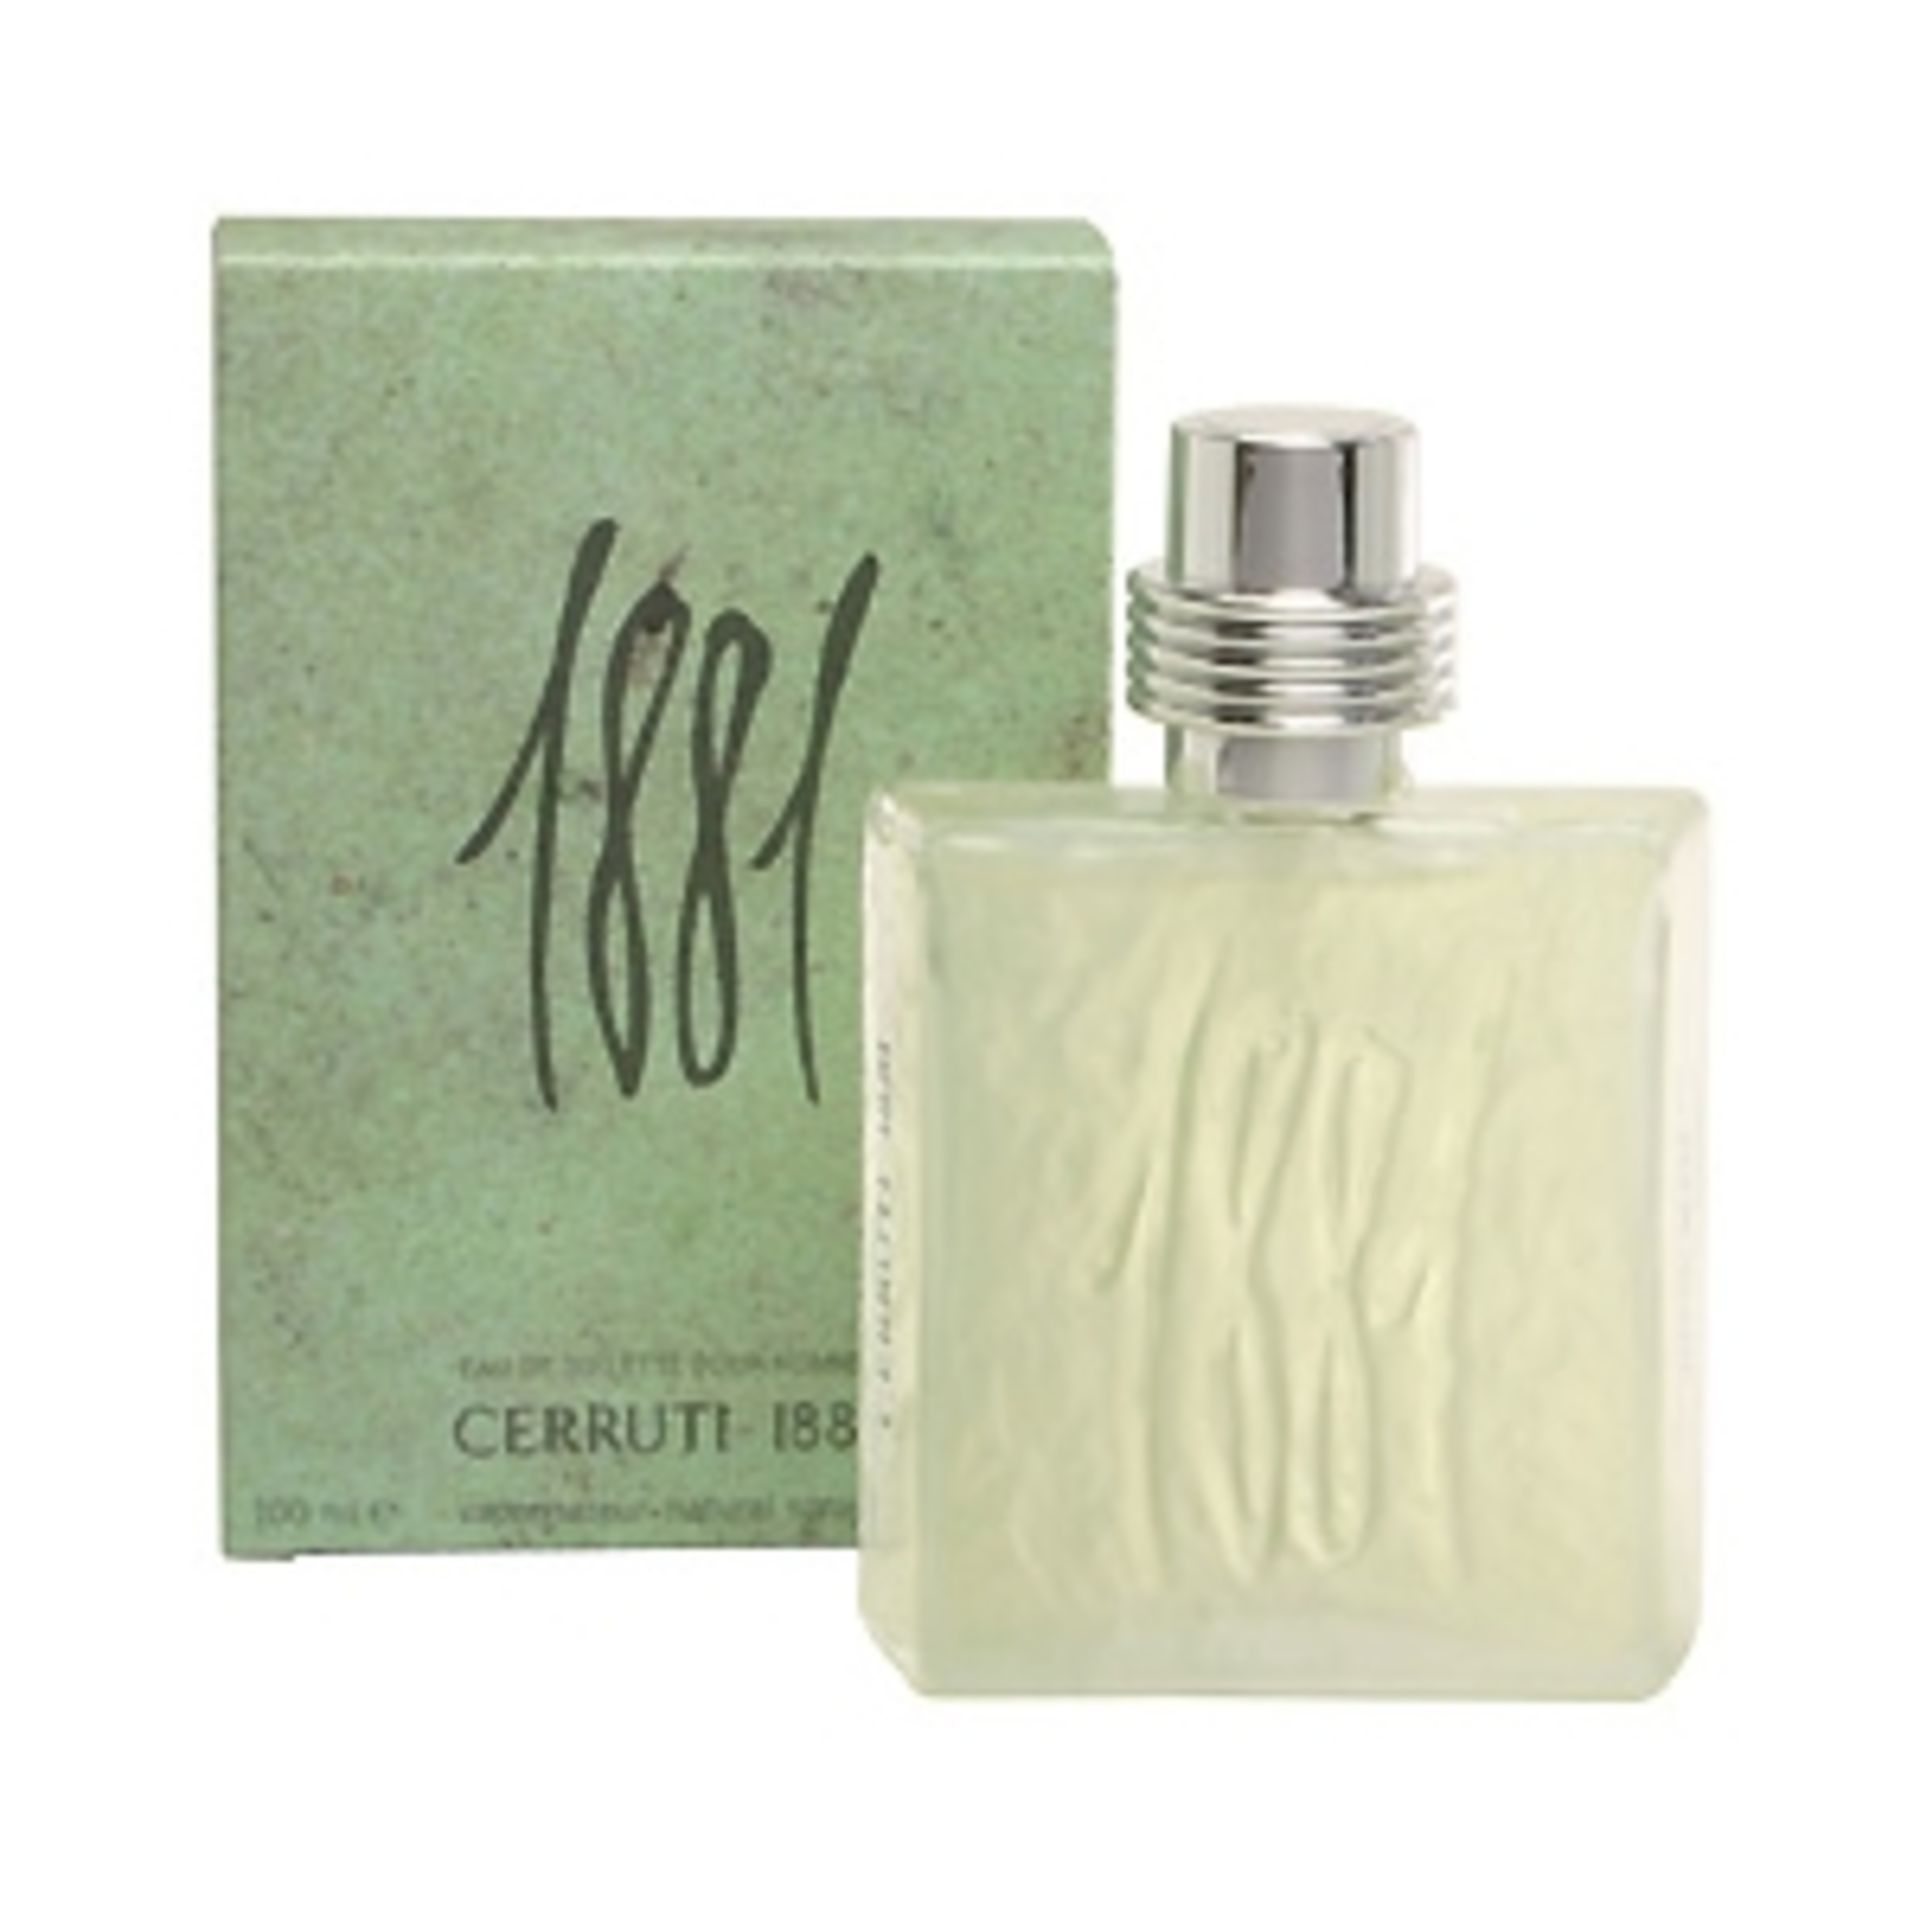 V Brand New Cerruti 1881 100ml EDT Pour Homme - The Perfume Shop £22.99 X 2 YOUR BID PRICE TO BE